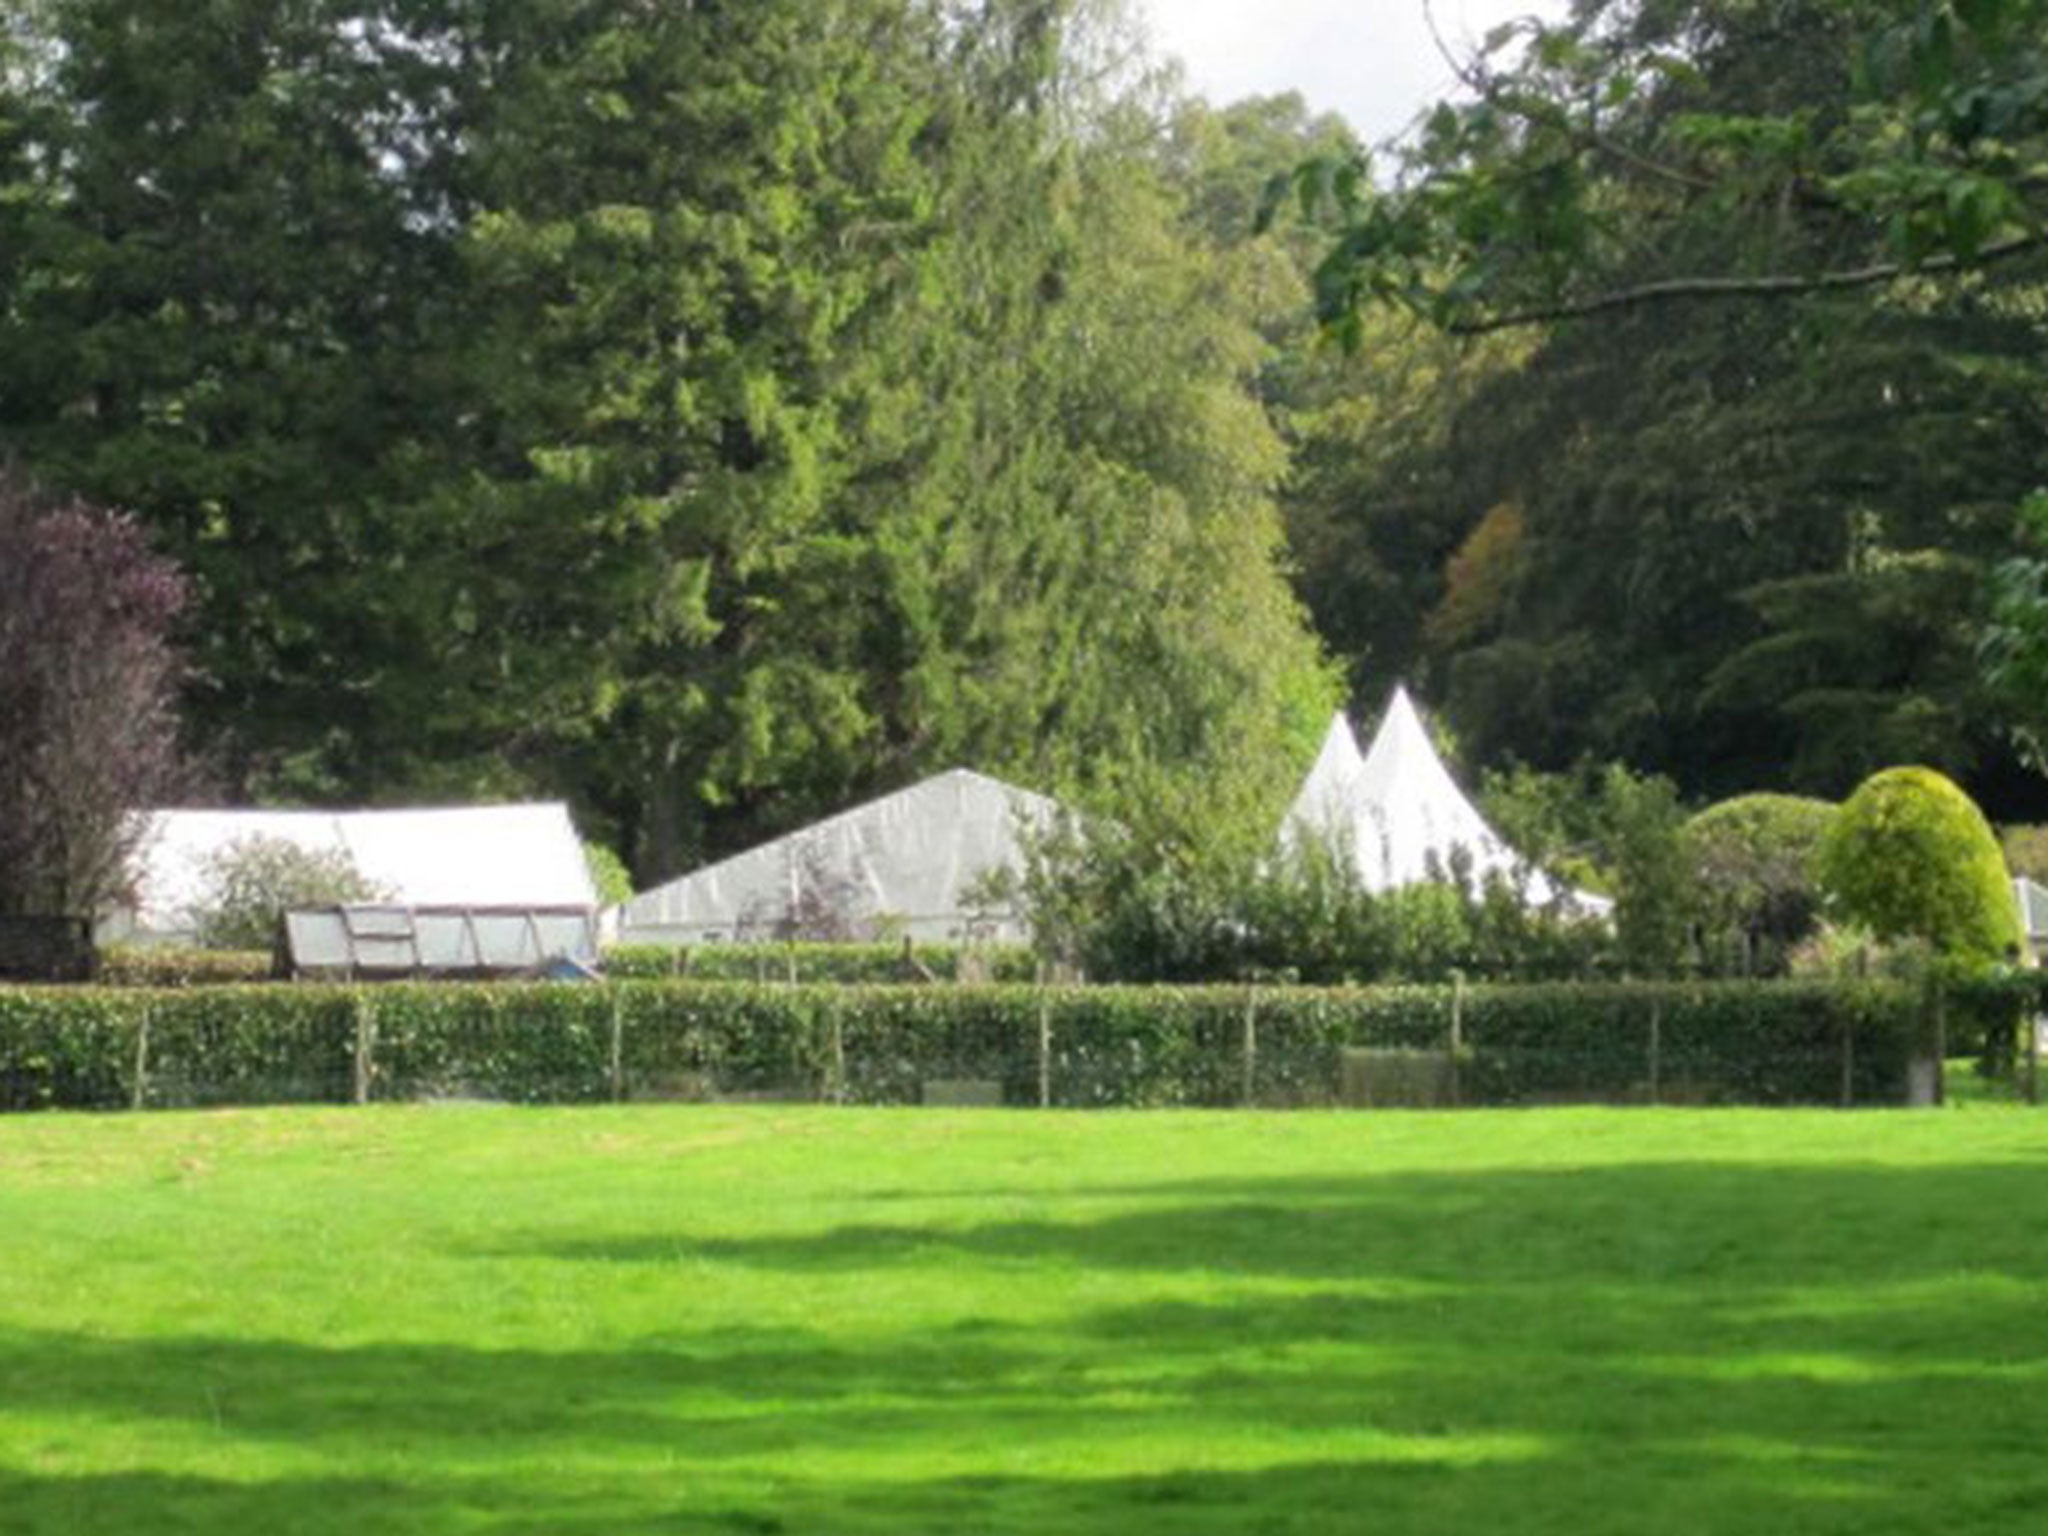 The marquee of the wedding celebration on the grounds of Larch Cottage in Ecclerigg, where the incident occurred